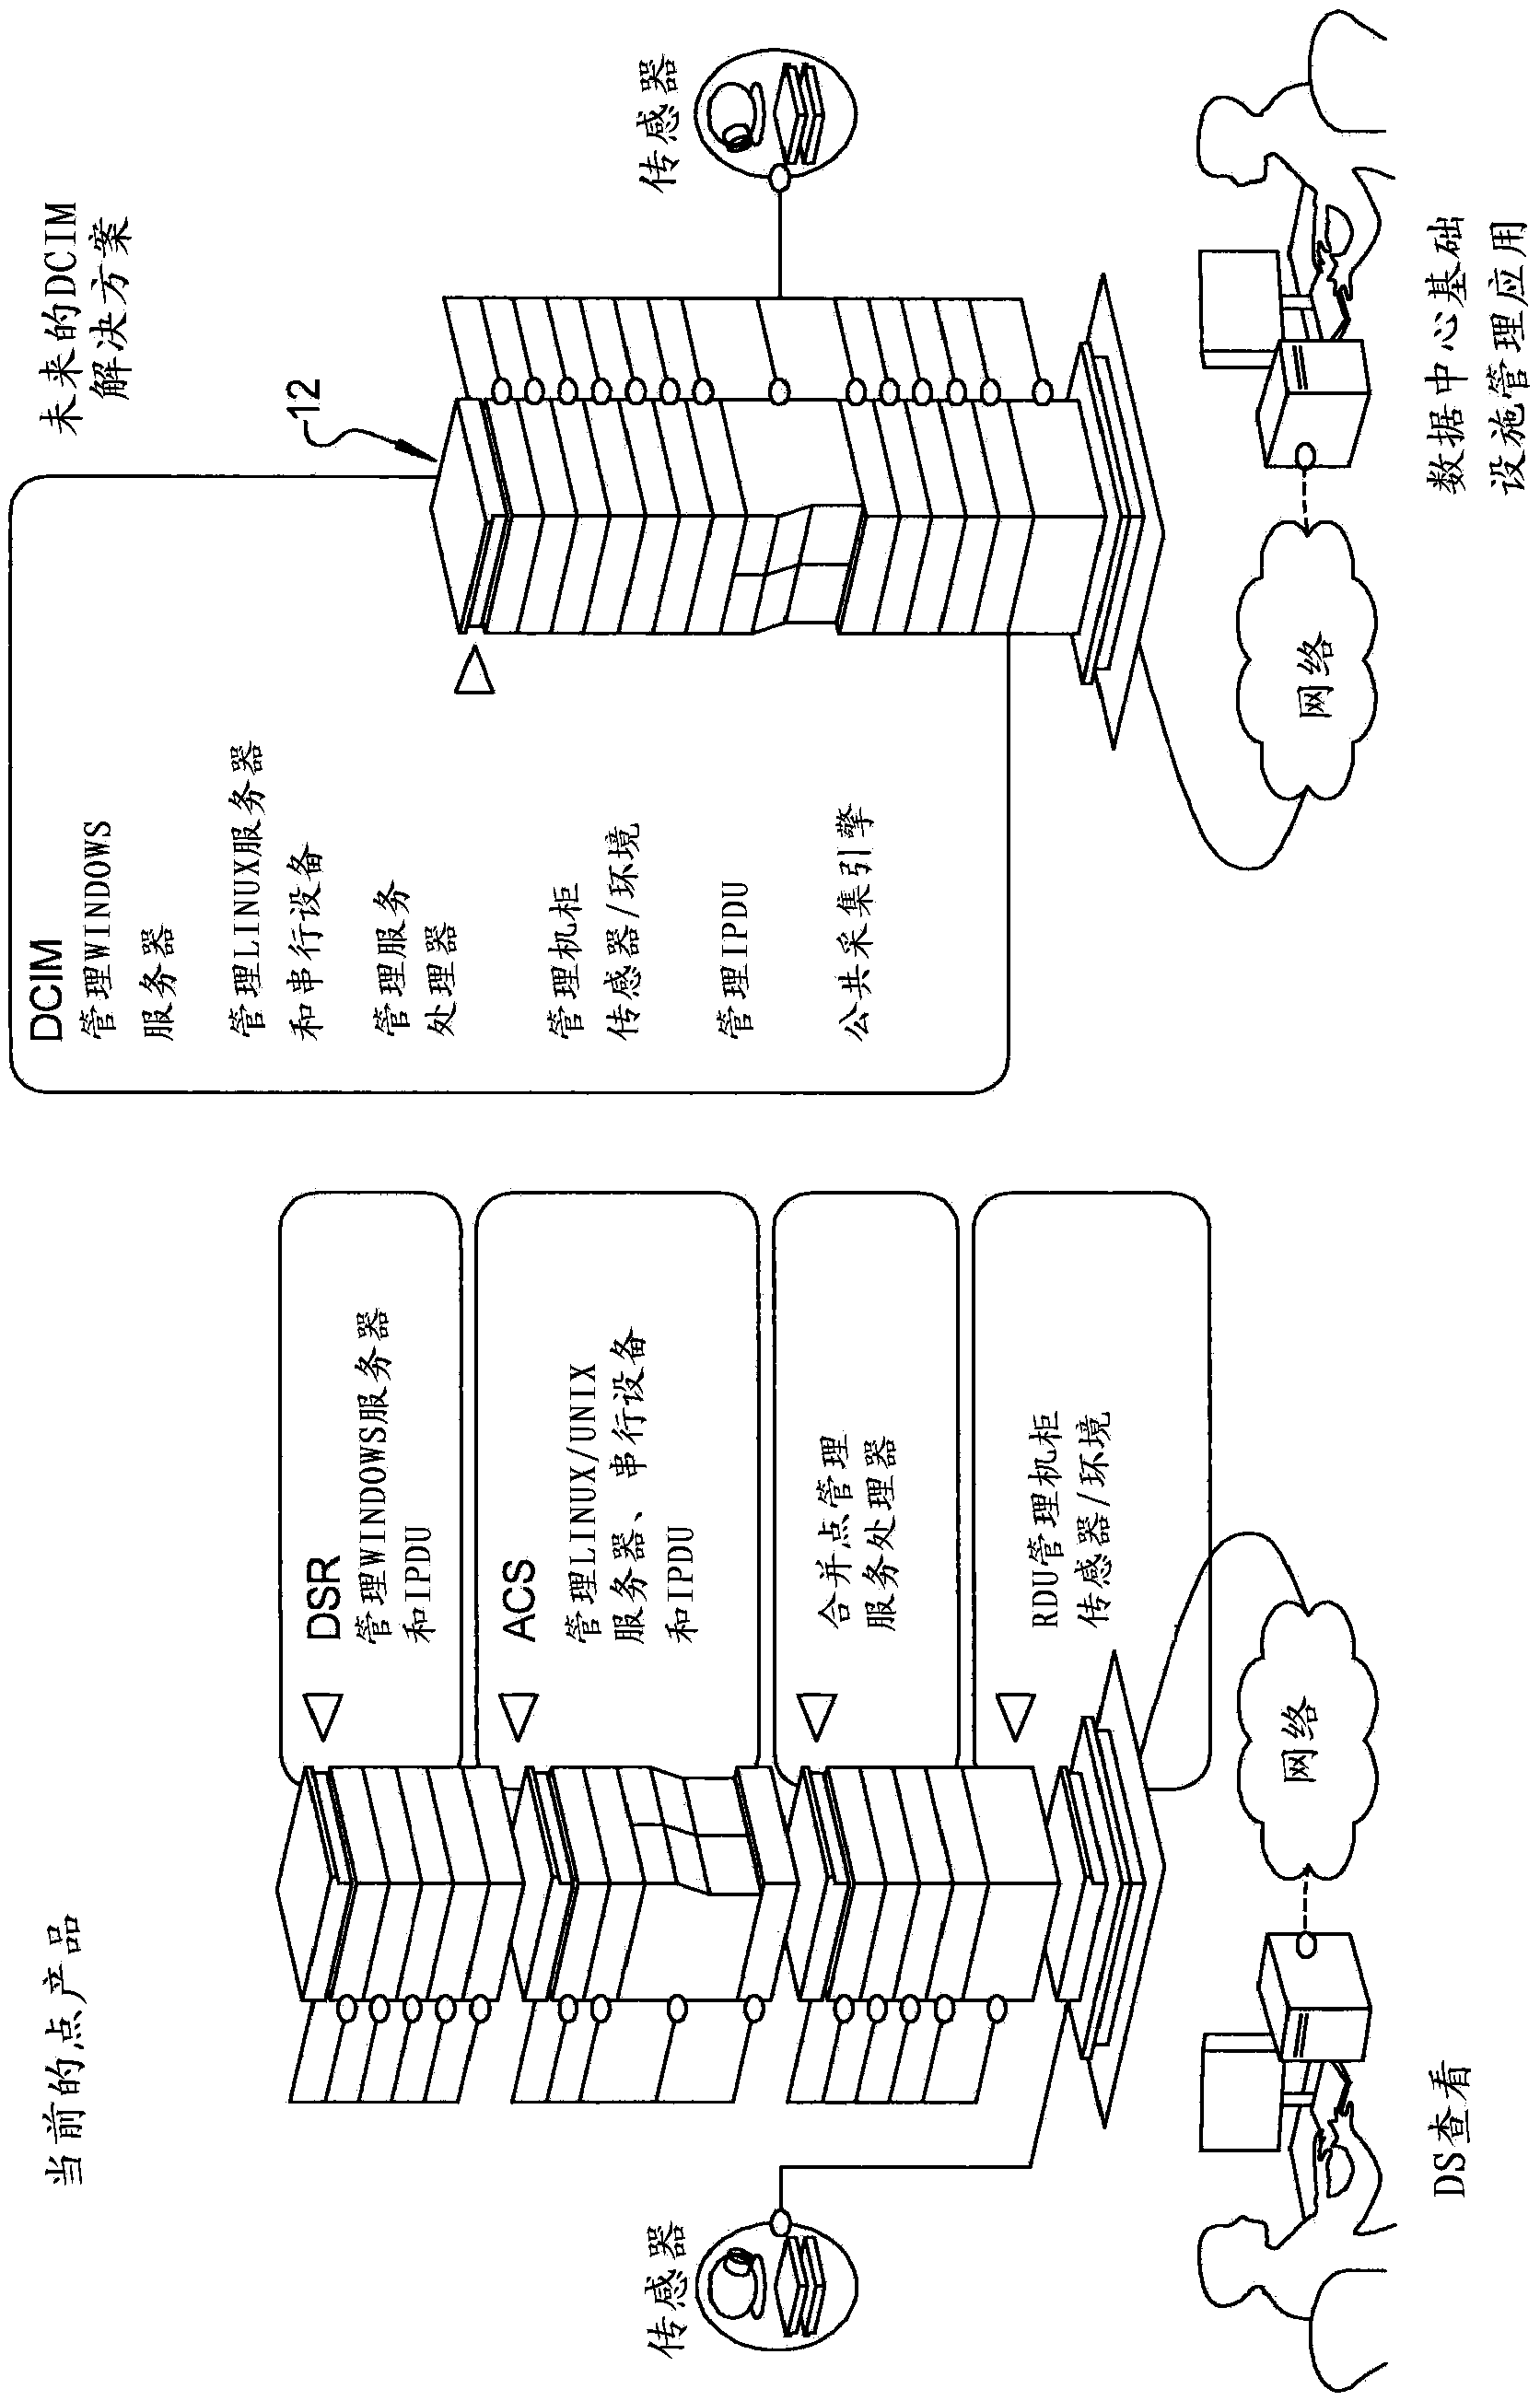 System and method for monitoring and managing data center resources incorporating a common data model repository